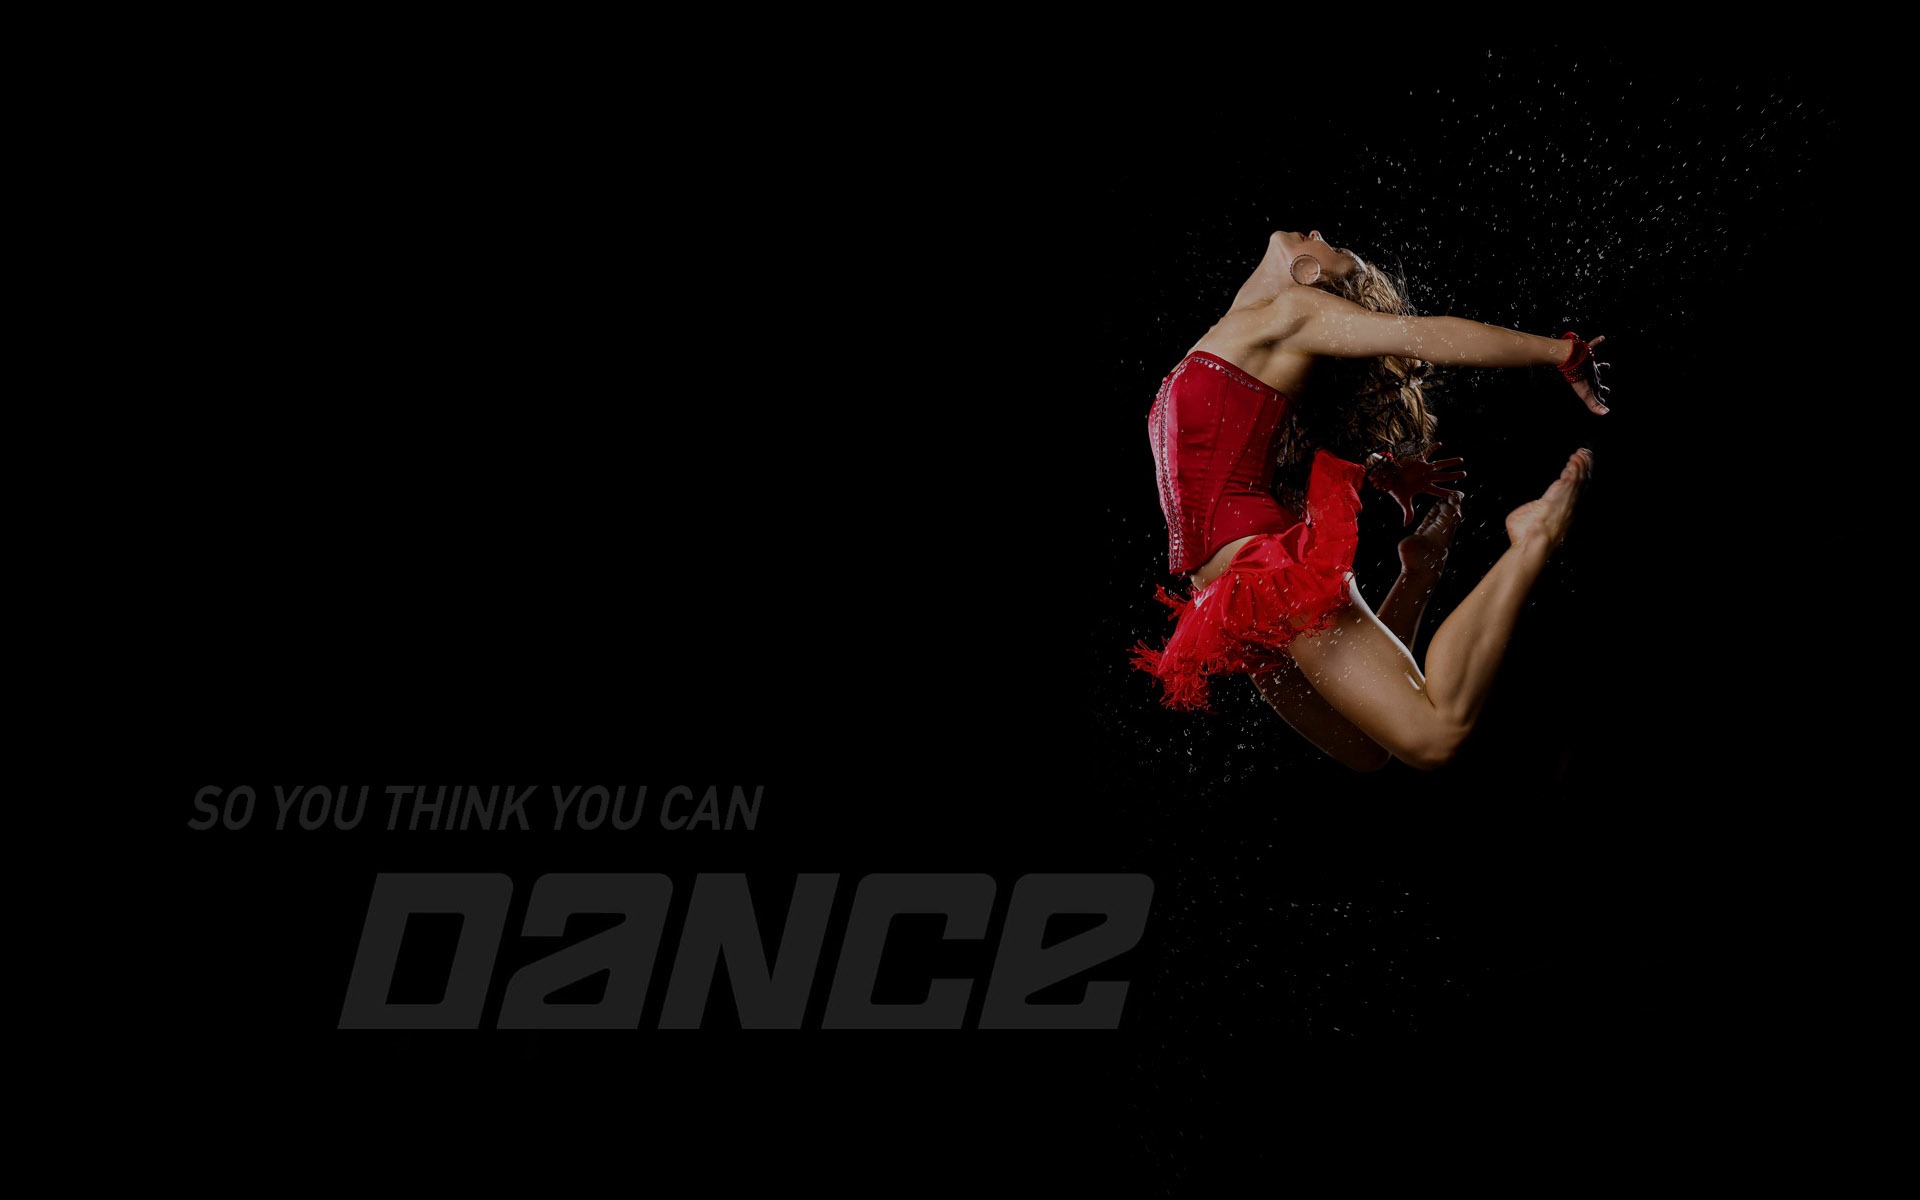 So You Think You Can Dance wallpaper (2) #1 - 1920x1200